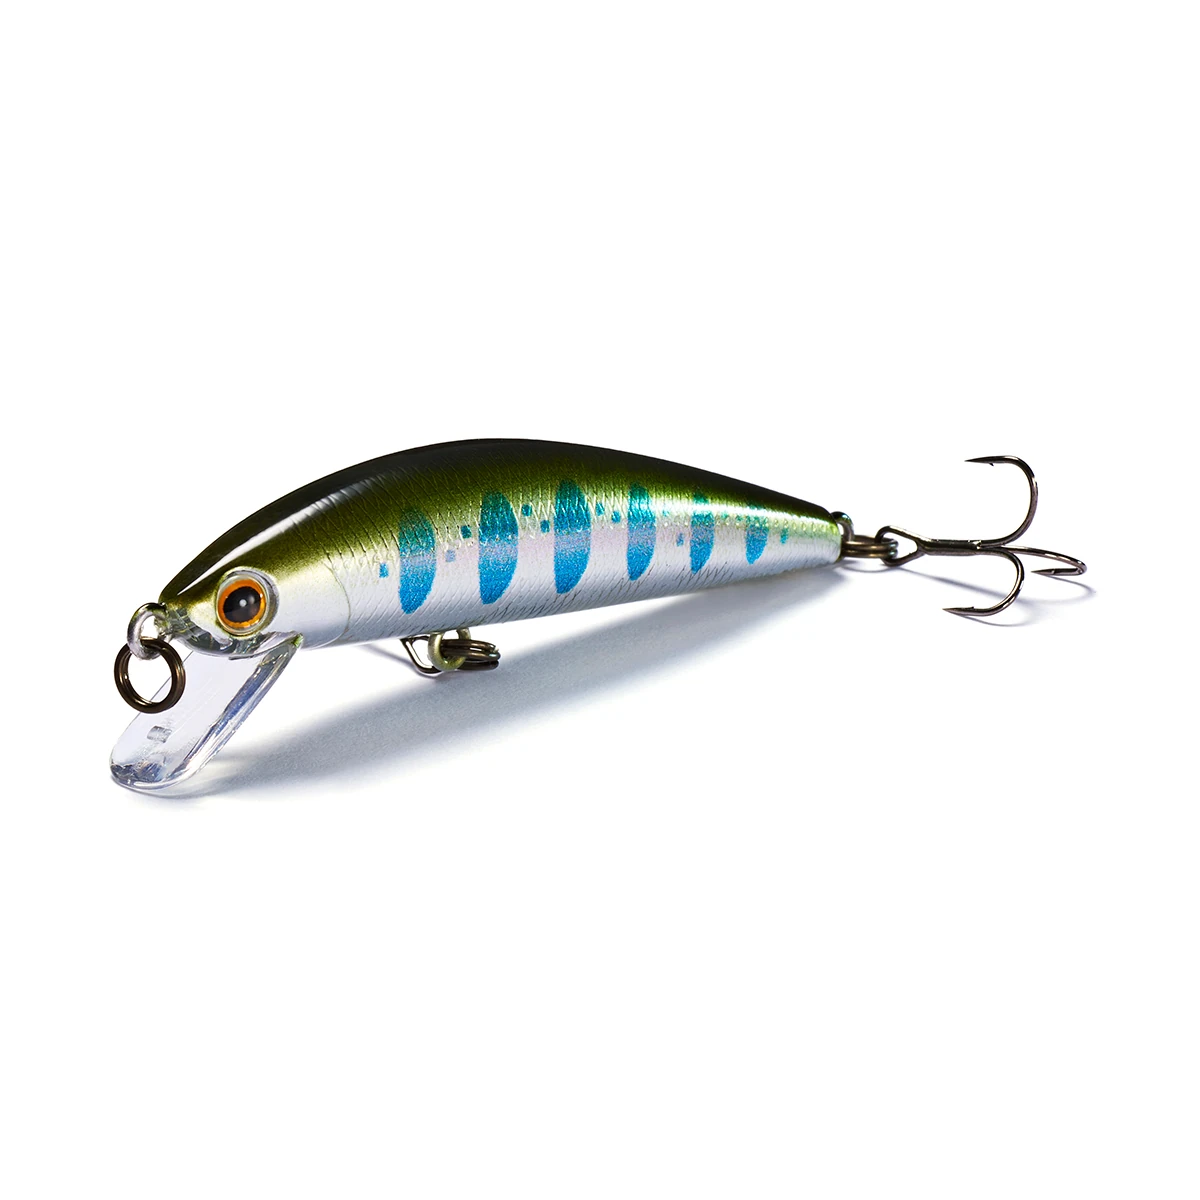 Go fishing G-HANDLE for bait reel - 【Bass Trout Salt lure fishing